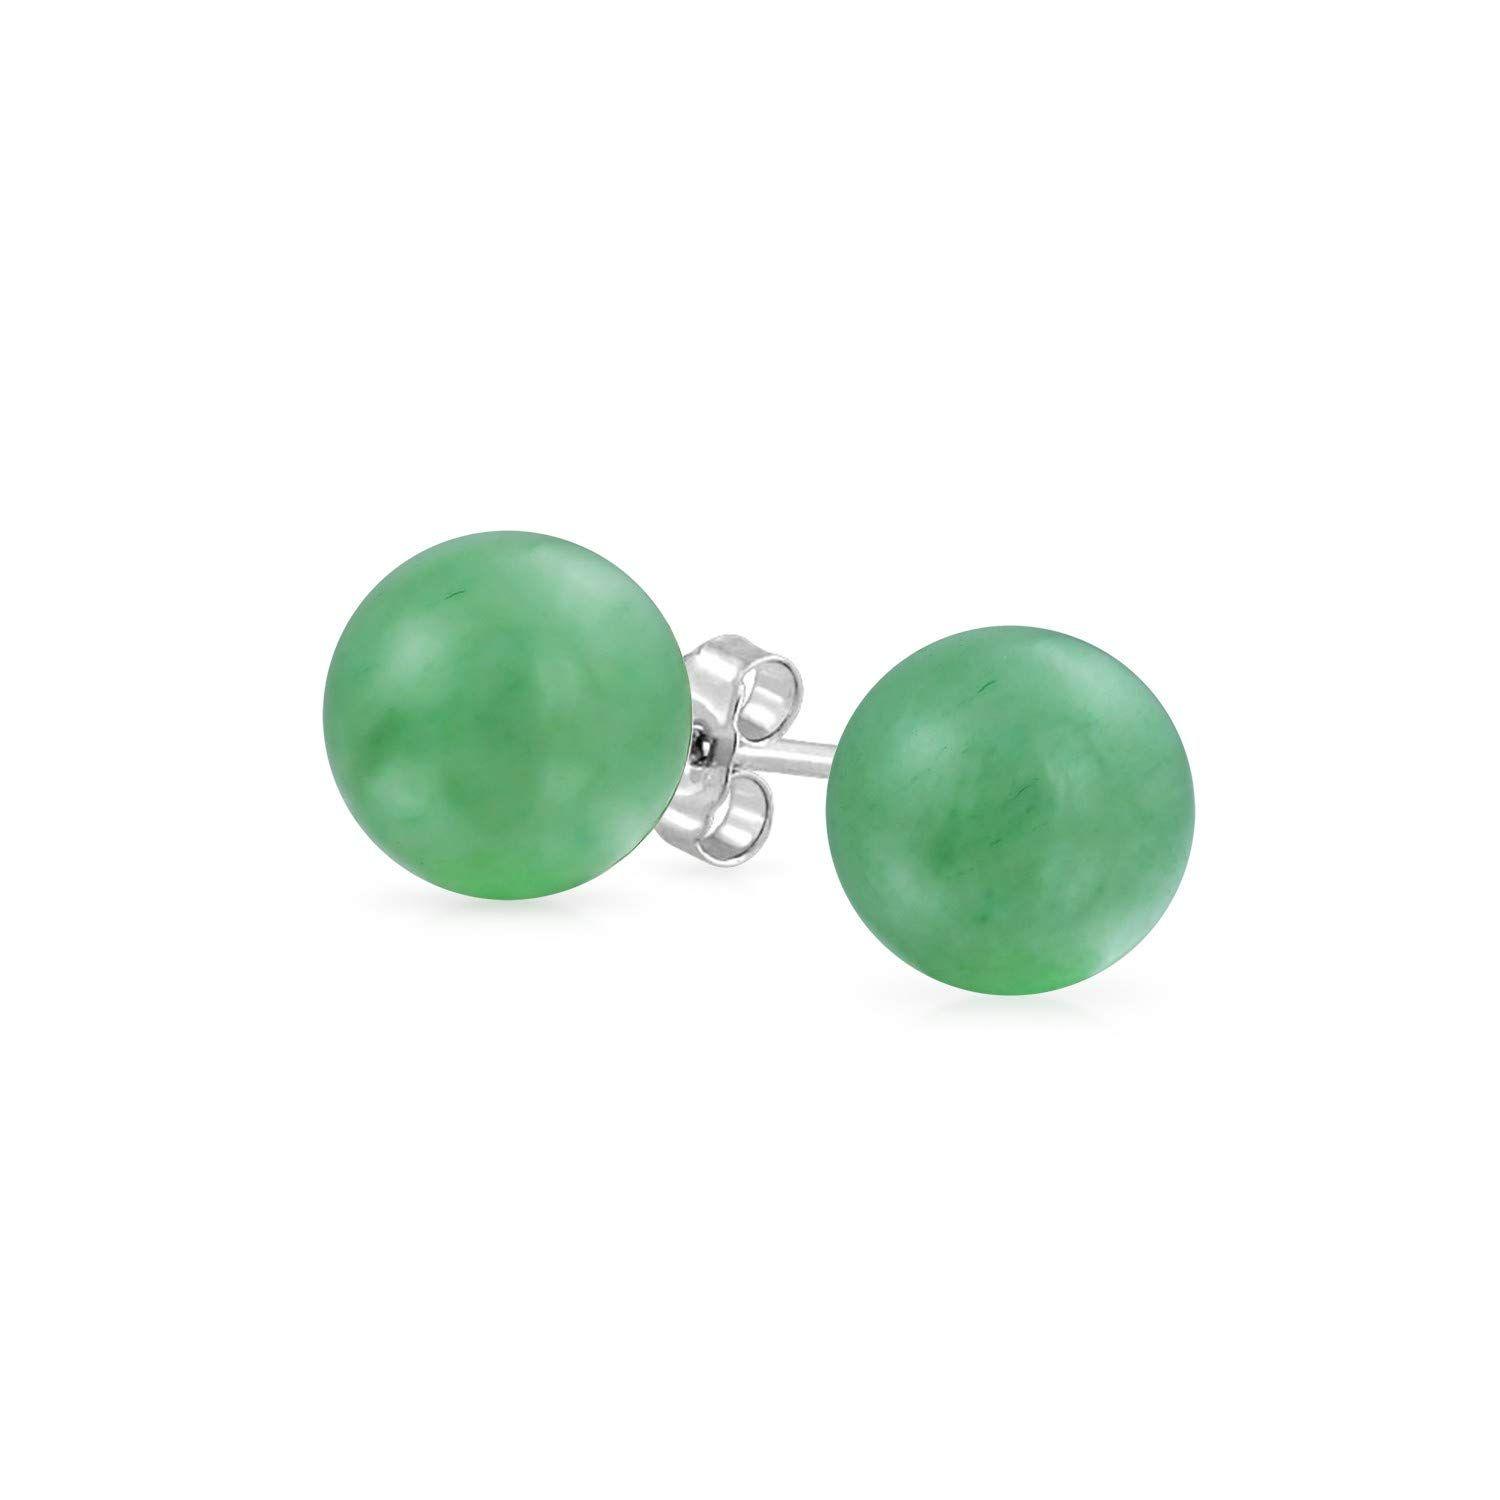 Green Circle with Silver Ball Logo - Amazon.com: Tisoro Sterling Silver Green Jade Ball Stud Earrings in ...